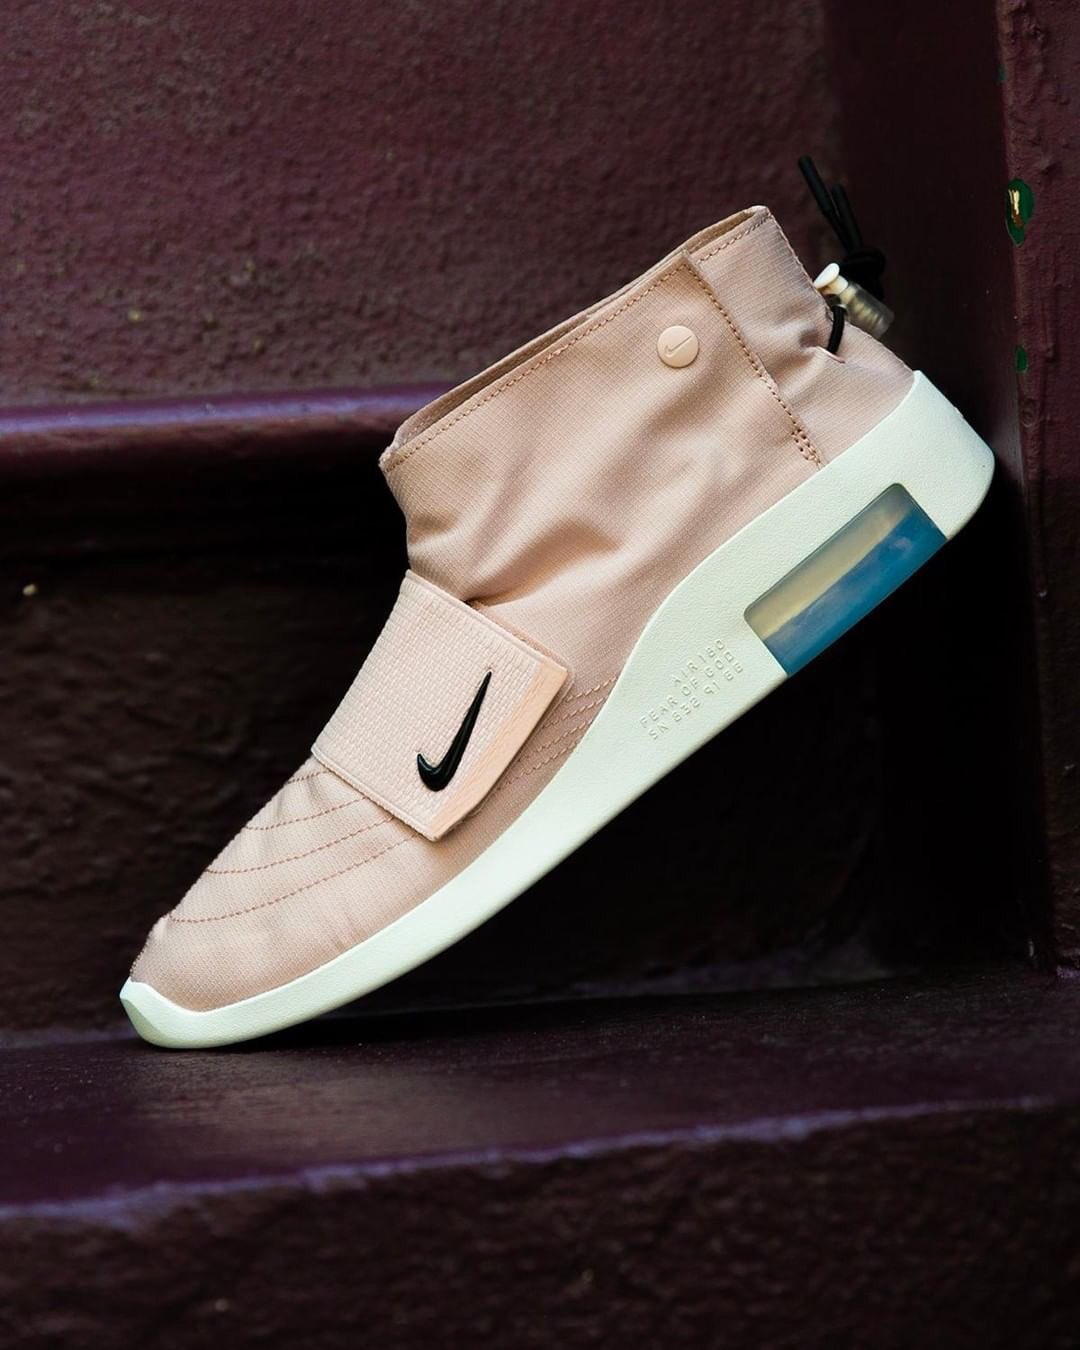 montaje inteligente Terrible Foot Locker Canada on Twitter: "Nike Air Fear of God Moccasin "Particle  Beige" 👀 Now available at 900 Rue Sainte-Catherine Ouest and Yorkdale  Shopping Centre https://t.co/W30H7uZcoC" / Twitter